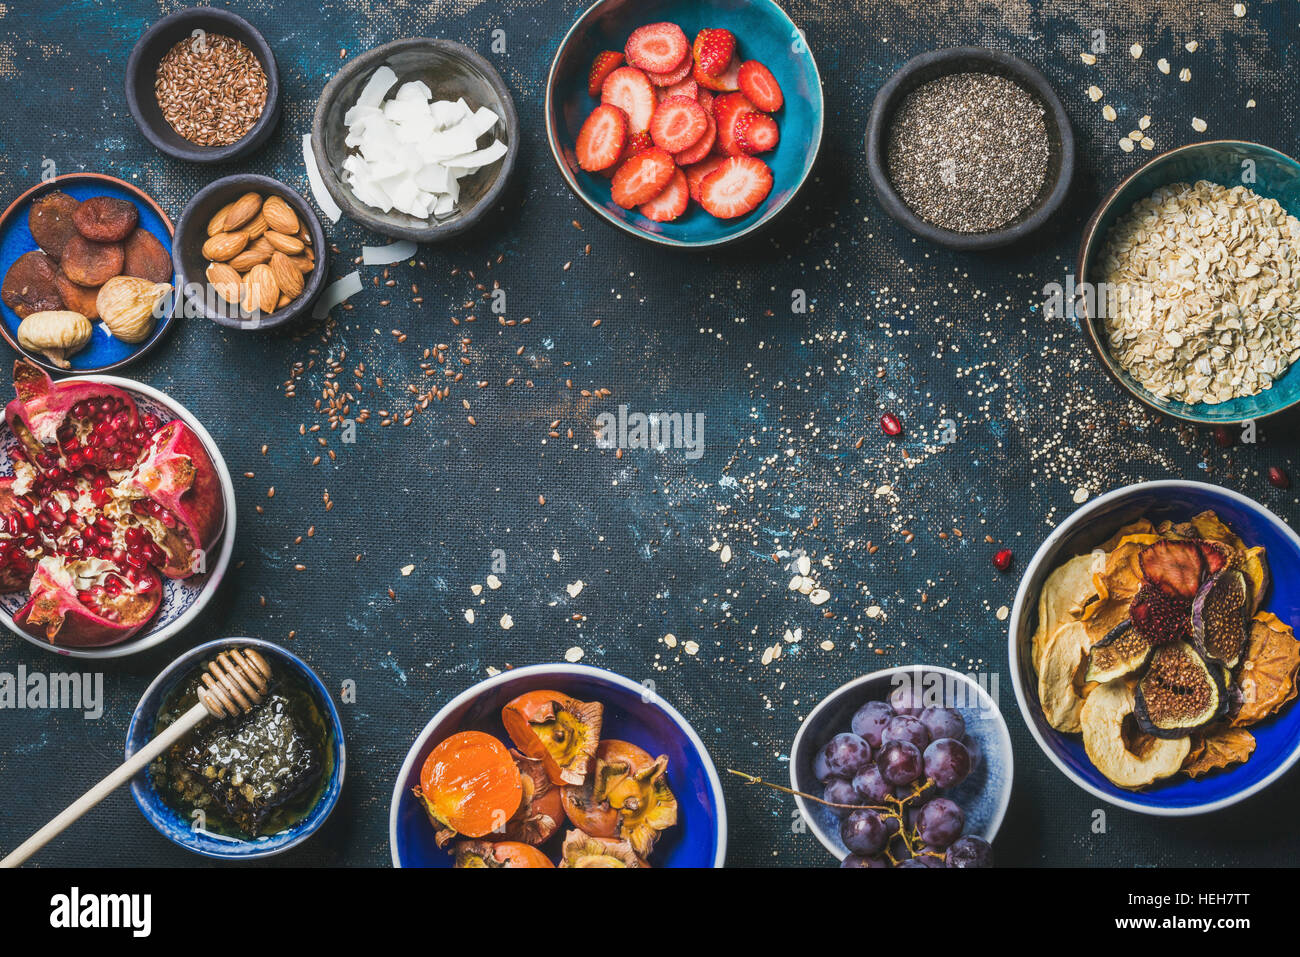 Ingredients for healthy breakfast over dark blue background, top view, copy space. Fresh and dried fruit, chia seeds, oatmeal, almonds, honey. Clean e Stock Photo